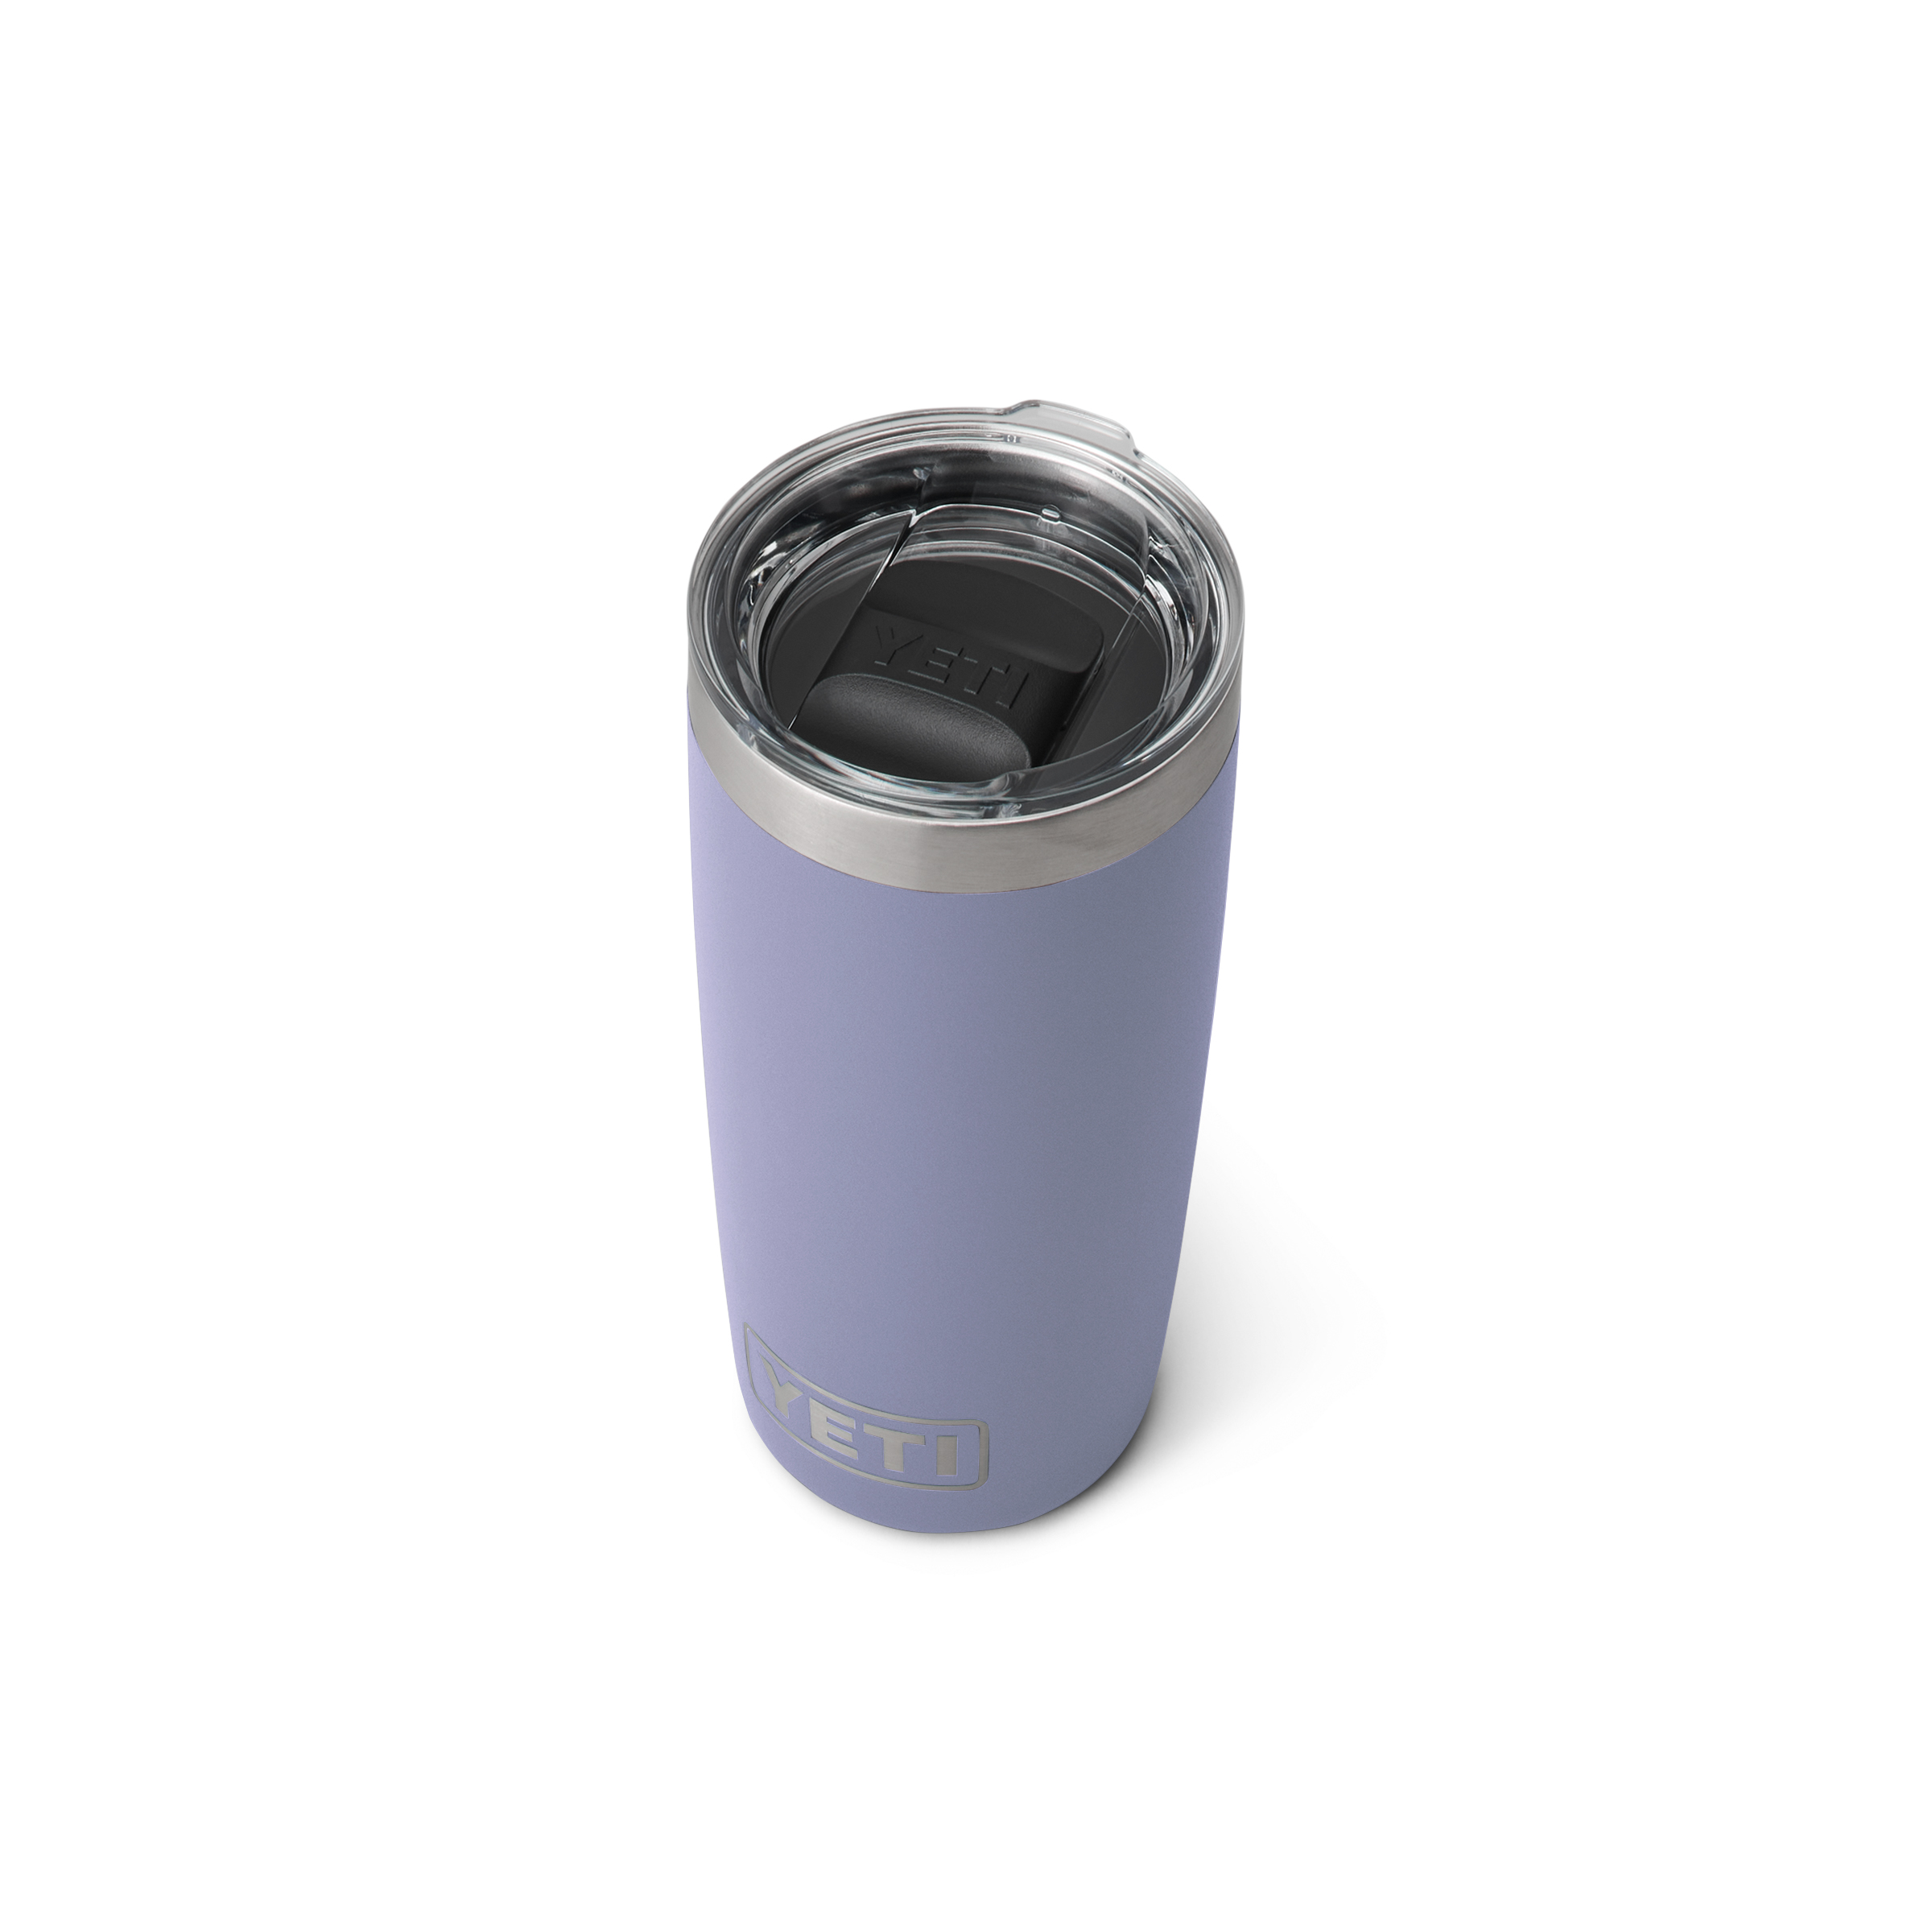  YETI Rambler 20 oz Tumbler, Stainless Steel, Vacuum Insulated  with MagSlider Lid, Cosmic Lilac : Home & Kitchen